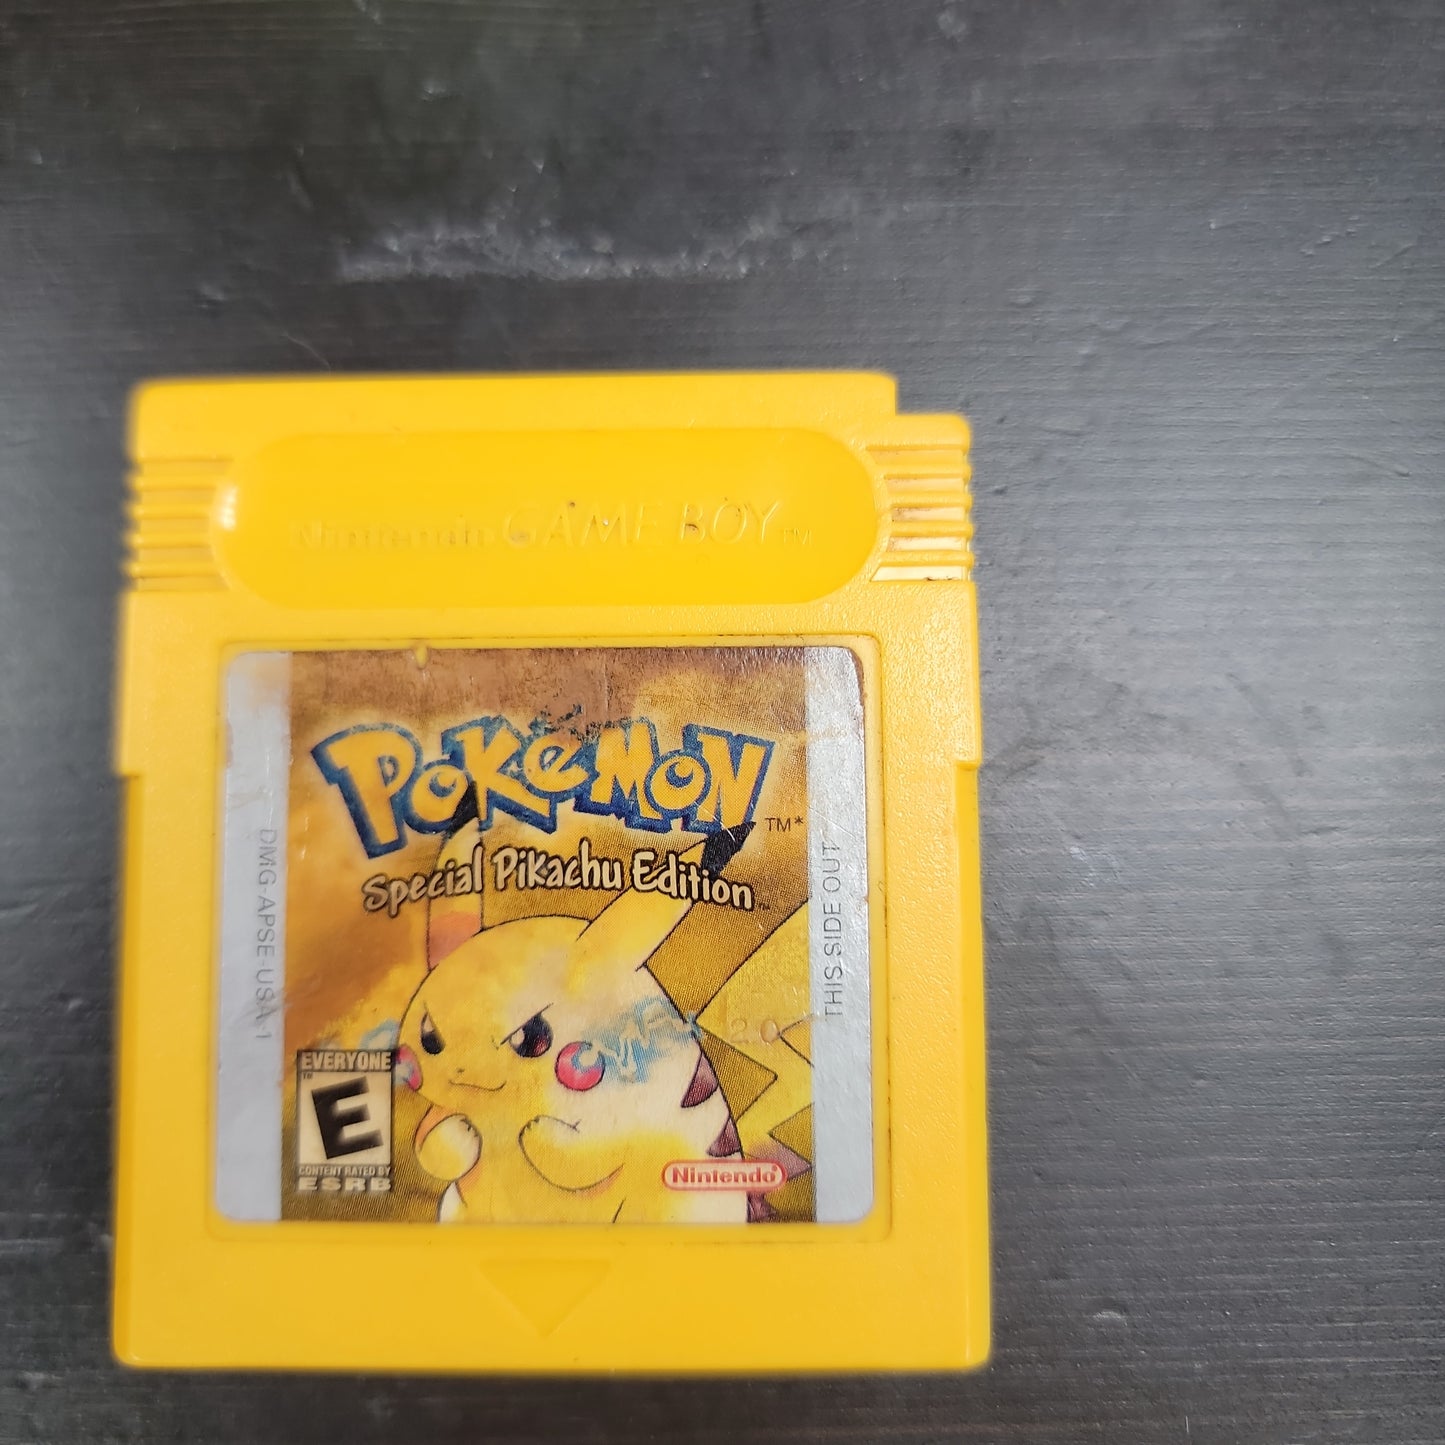 Pokemon Yellow Game Boy Game Stained Label